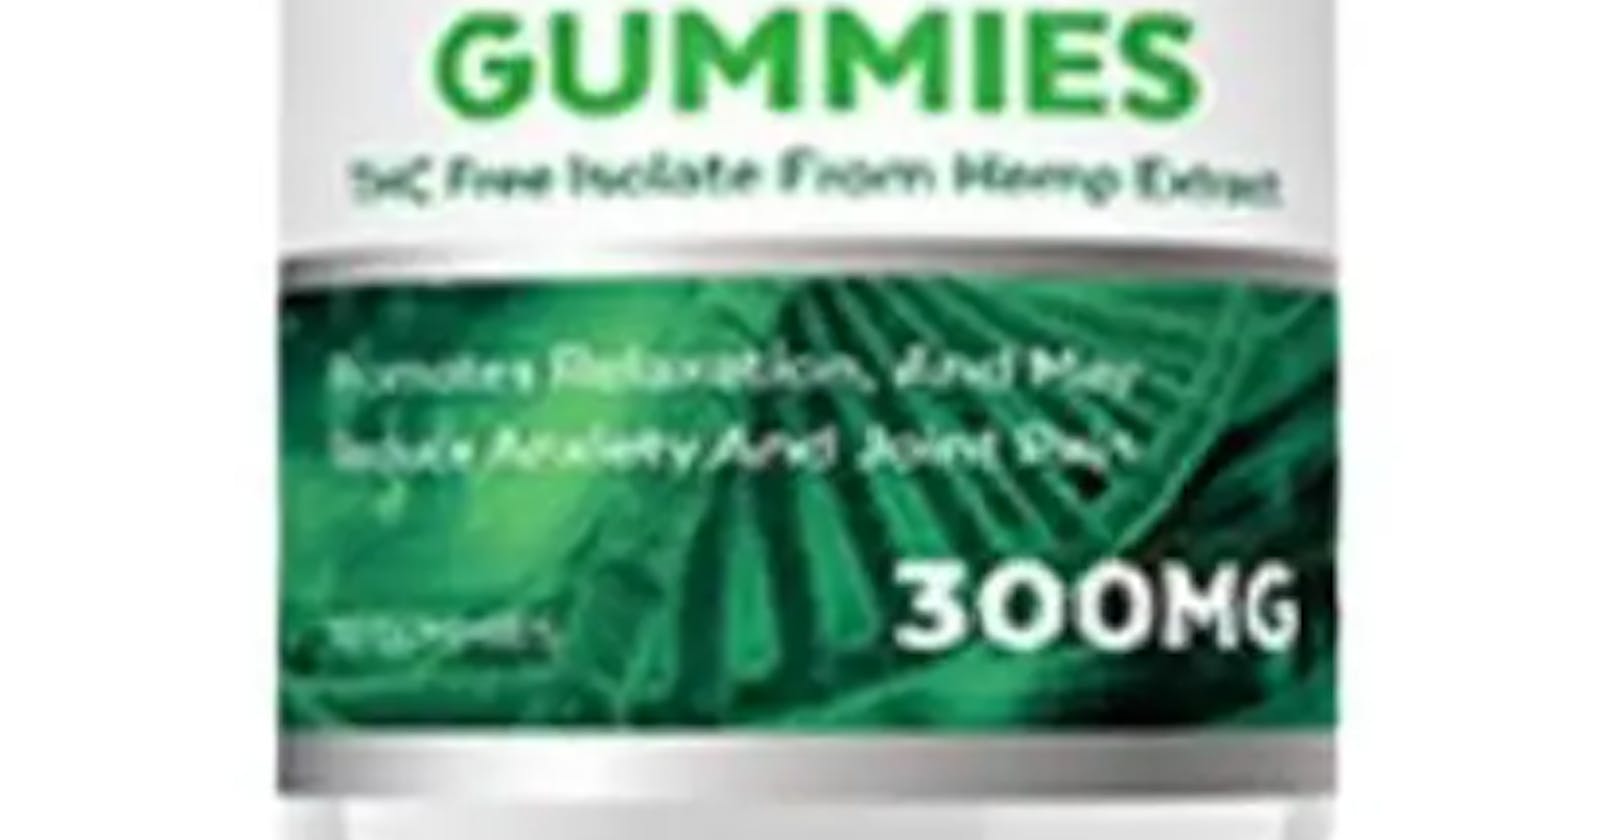 BioScience CBD Gummies Reviews, Cost, Amazon, For Sale, For Ed, 300mg & Where To Buy?